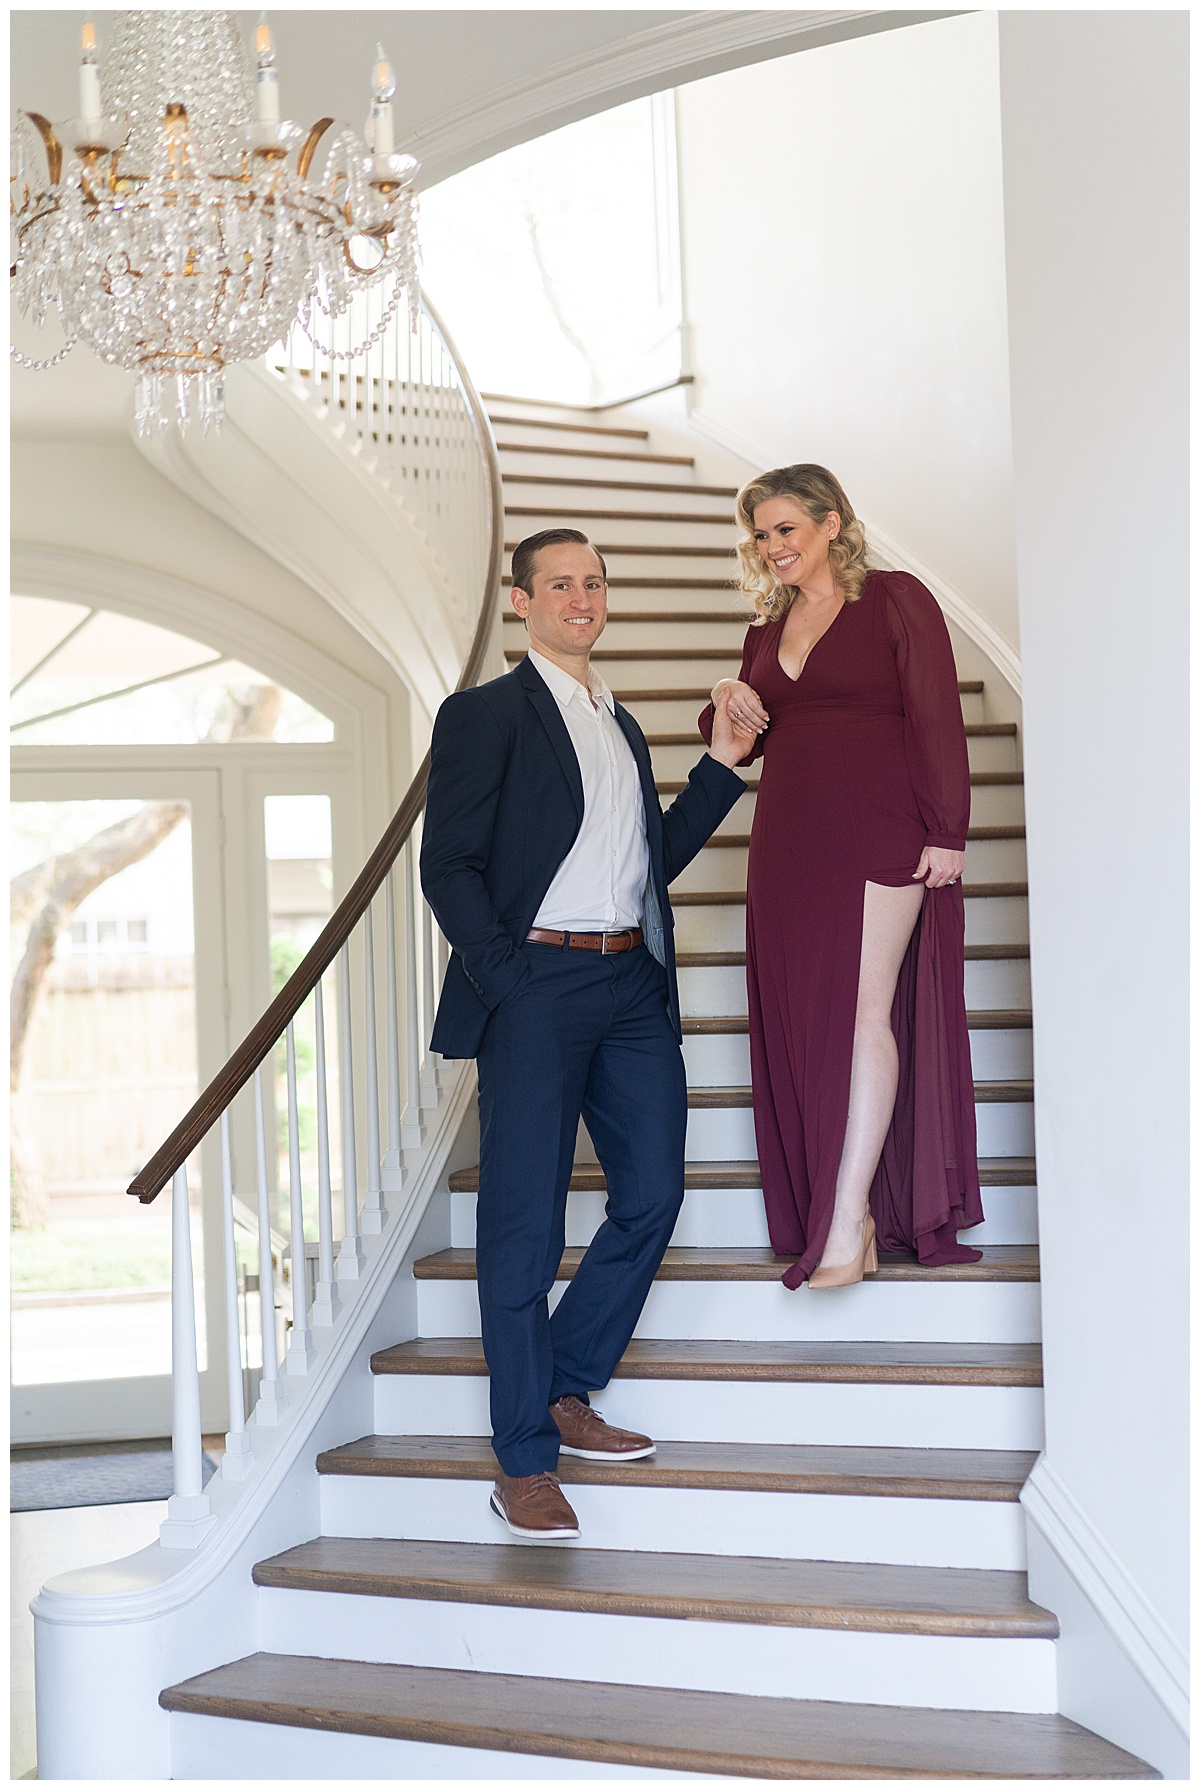 Man leads woman down the stairs for their Modern Romantic Engagement Session